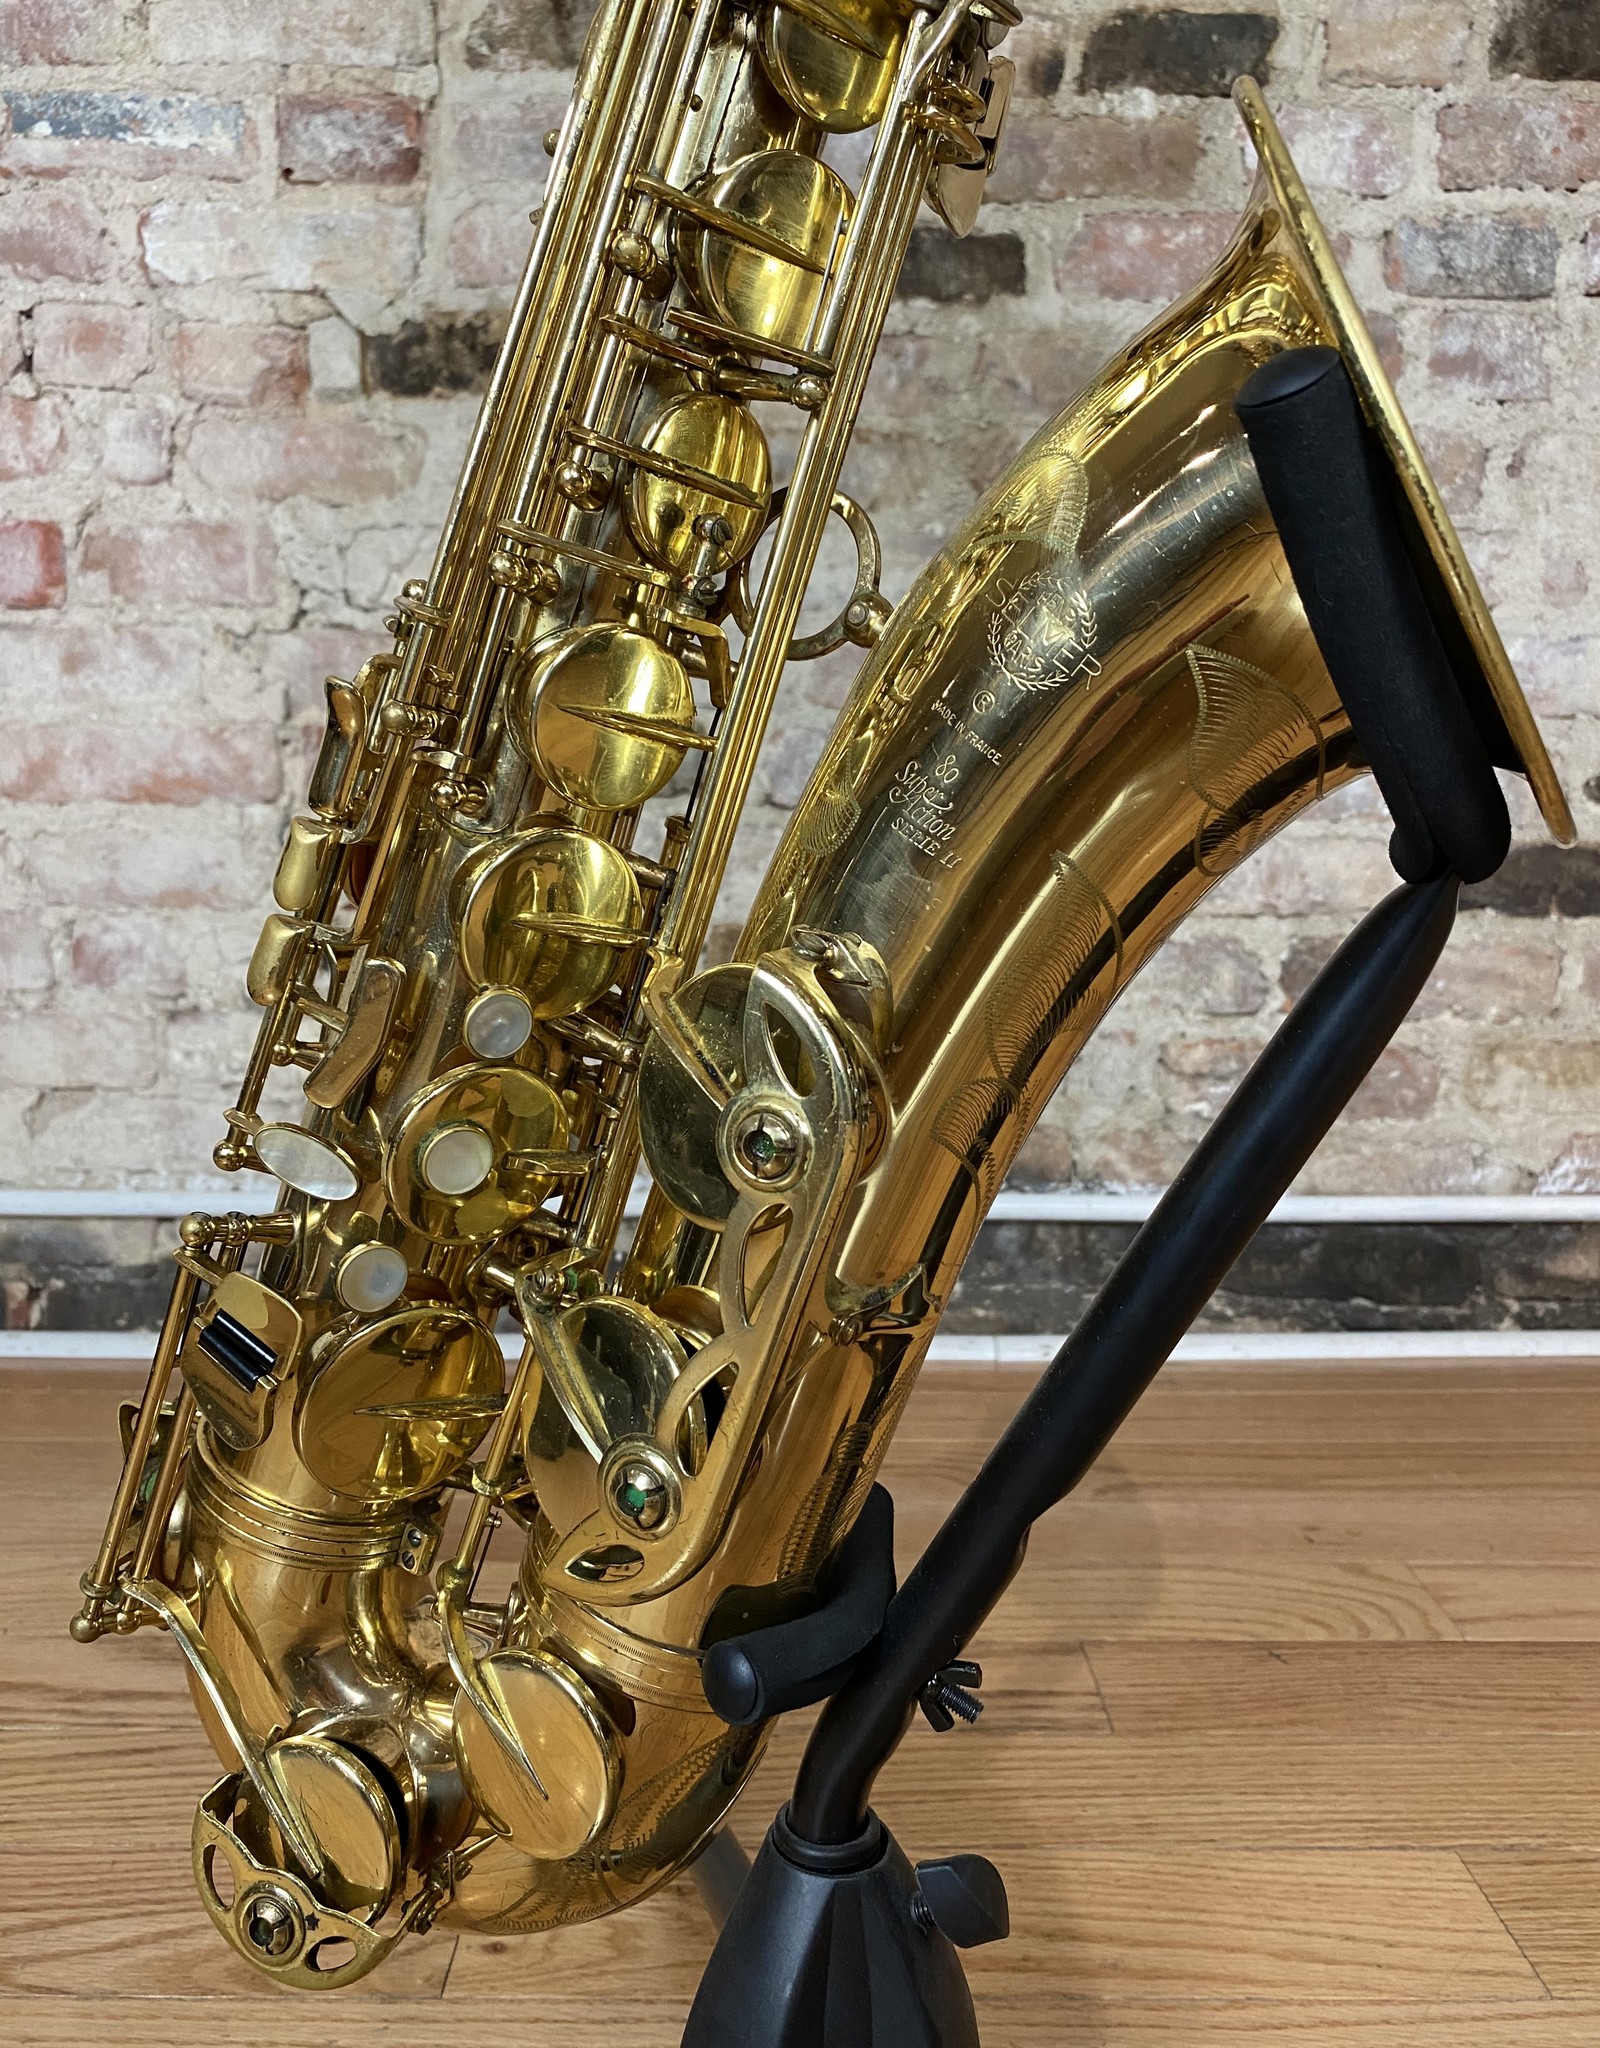 Selmer Selmer Super Action 80 Series II Tenor Saxophone in Great Condition!